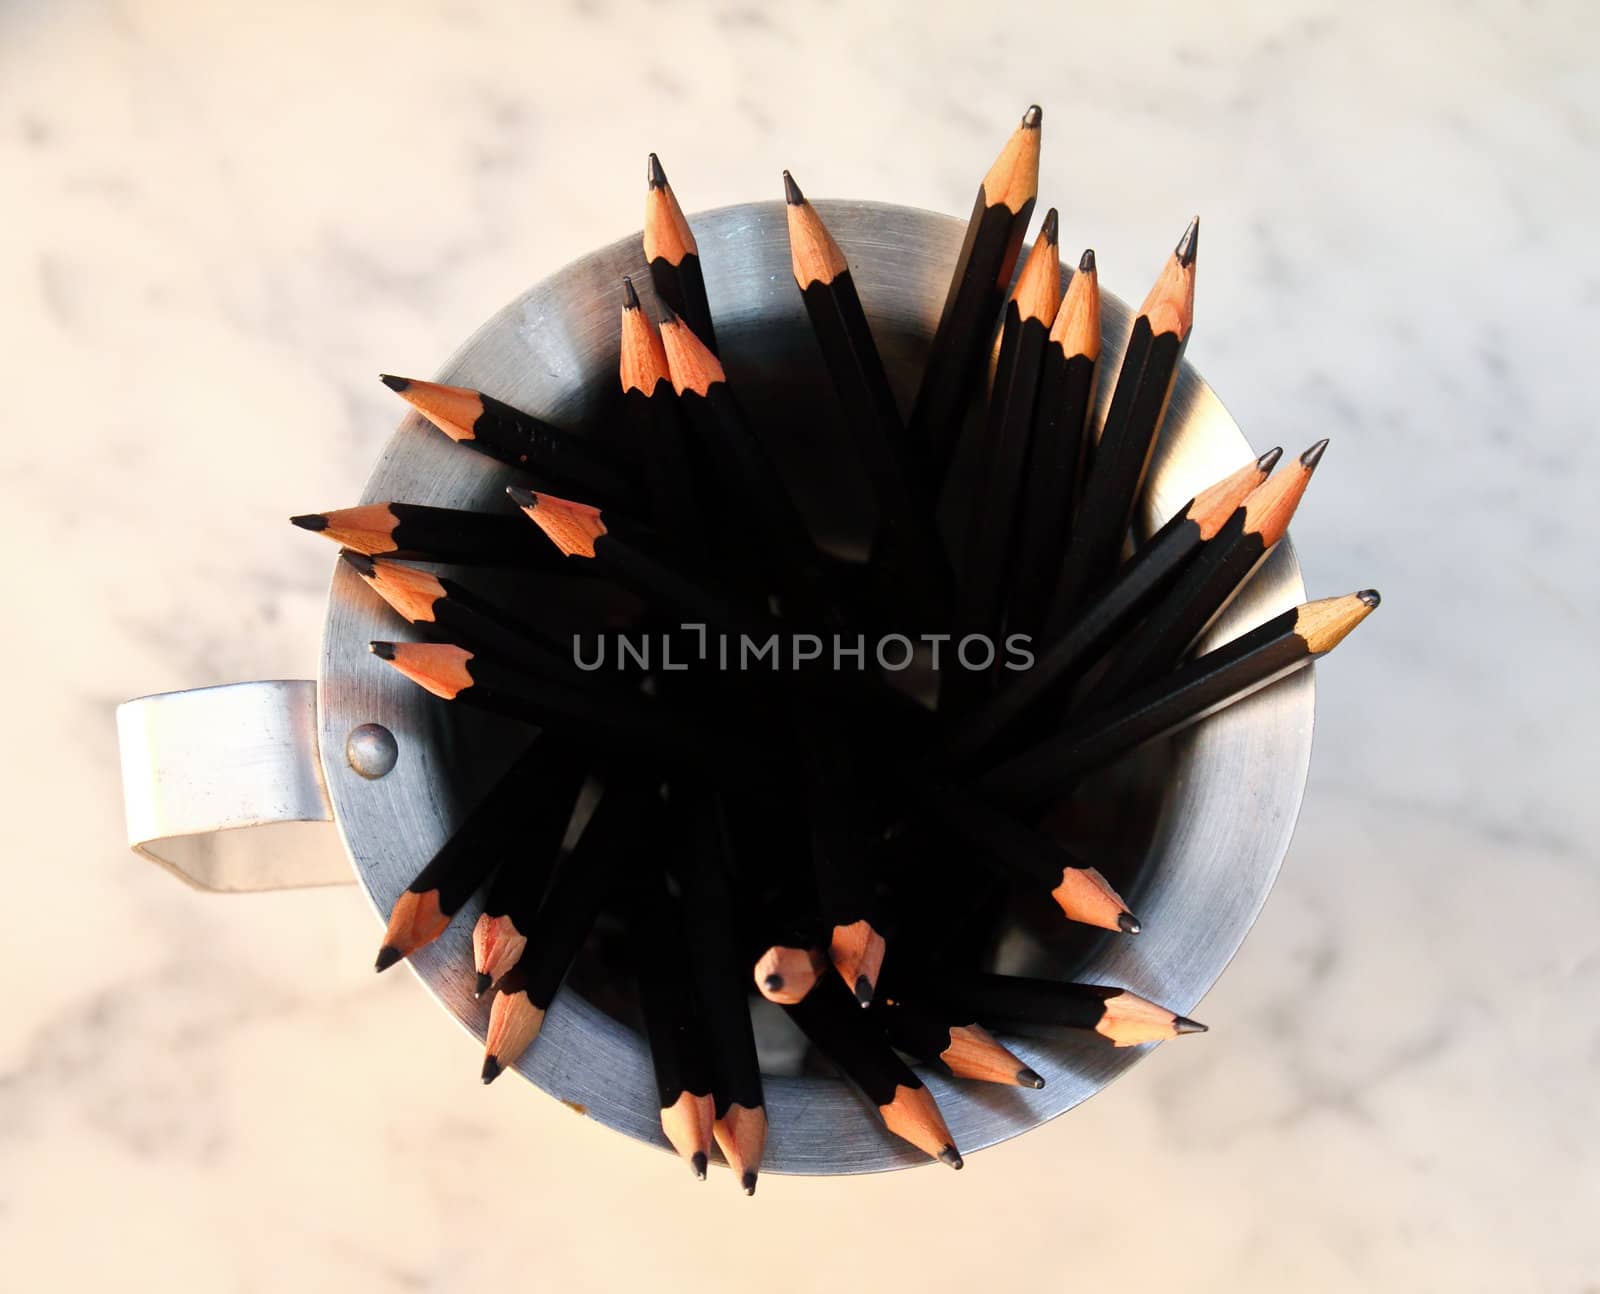 Bunch of pencils on cup by nuchylee